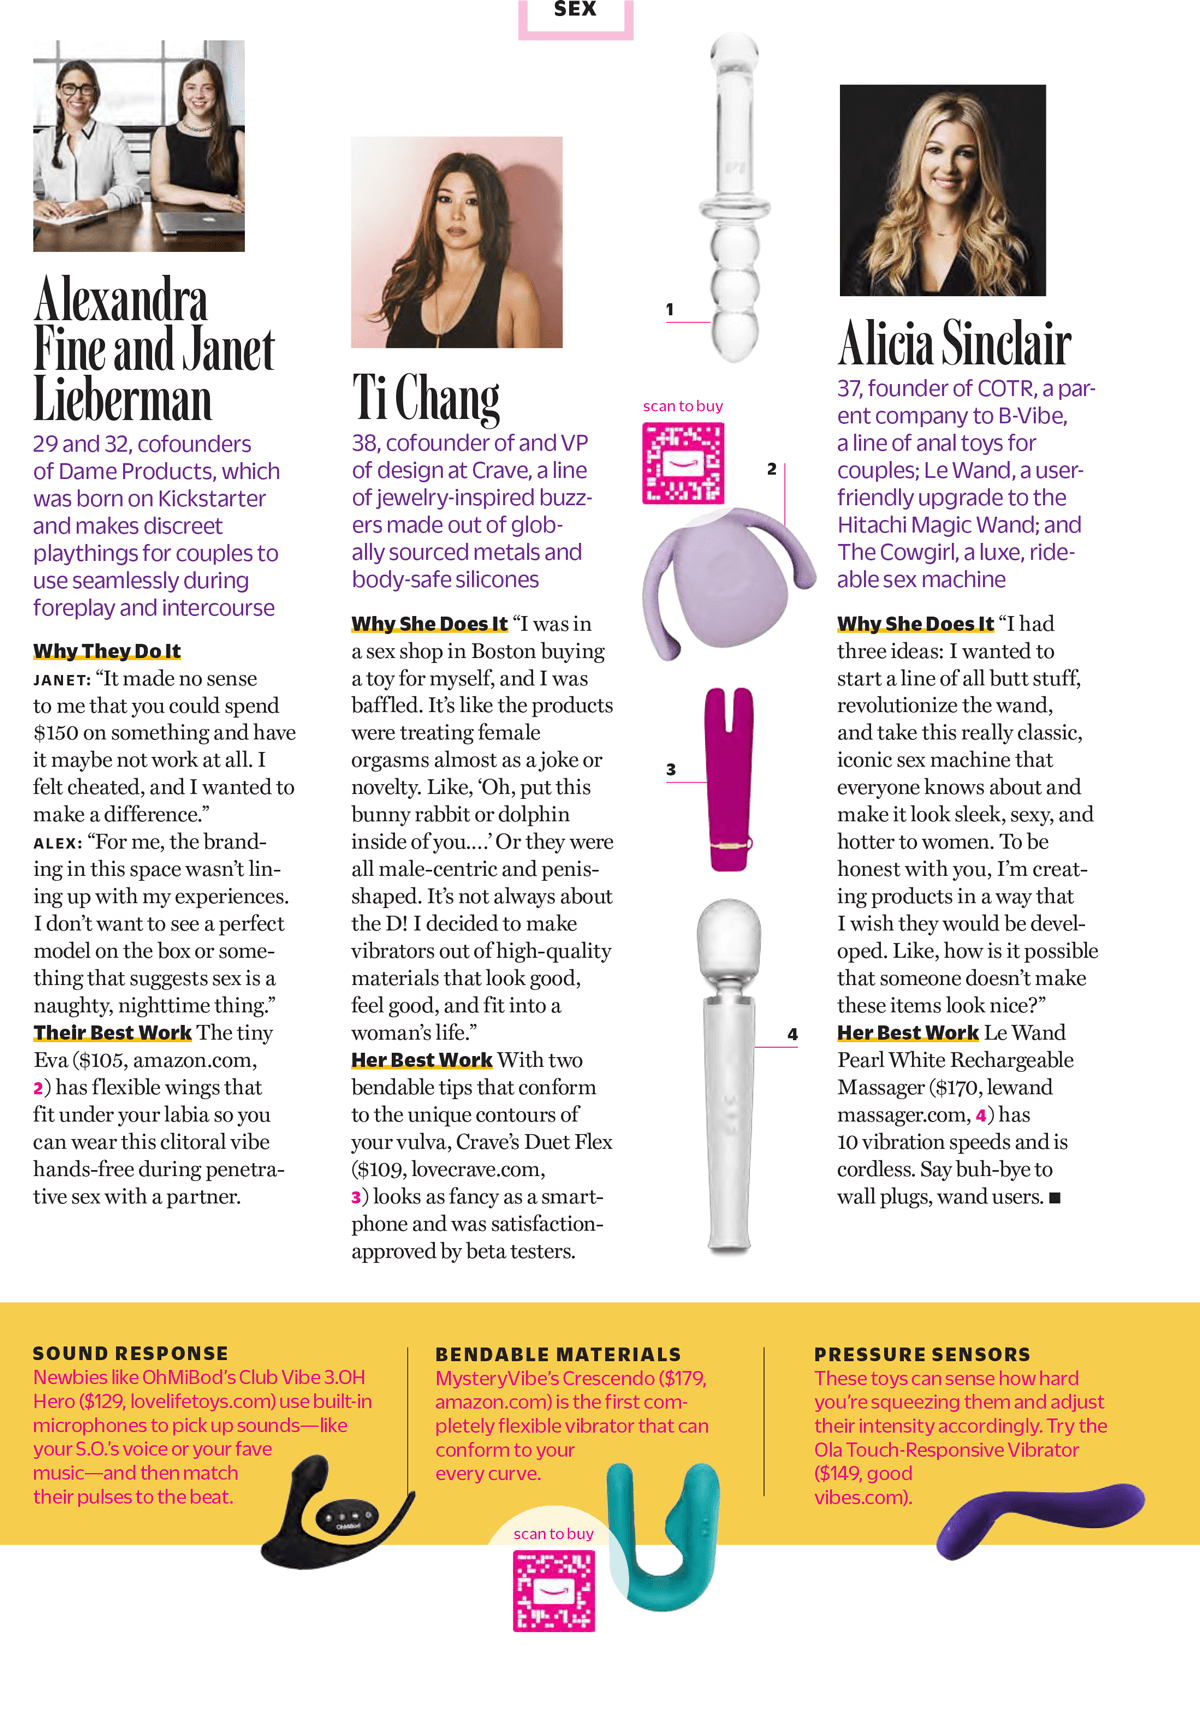 Cosmo speaks with Le Wand's founder Alicia Sinclair about how women are revolutionizing pleasure.